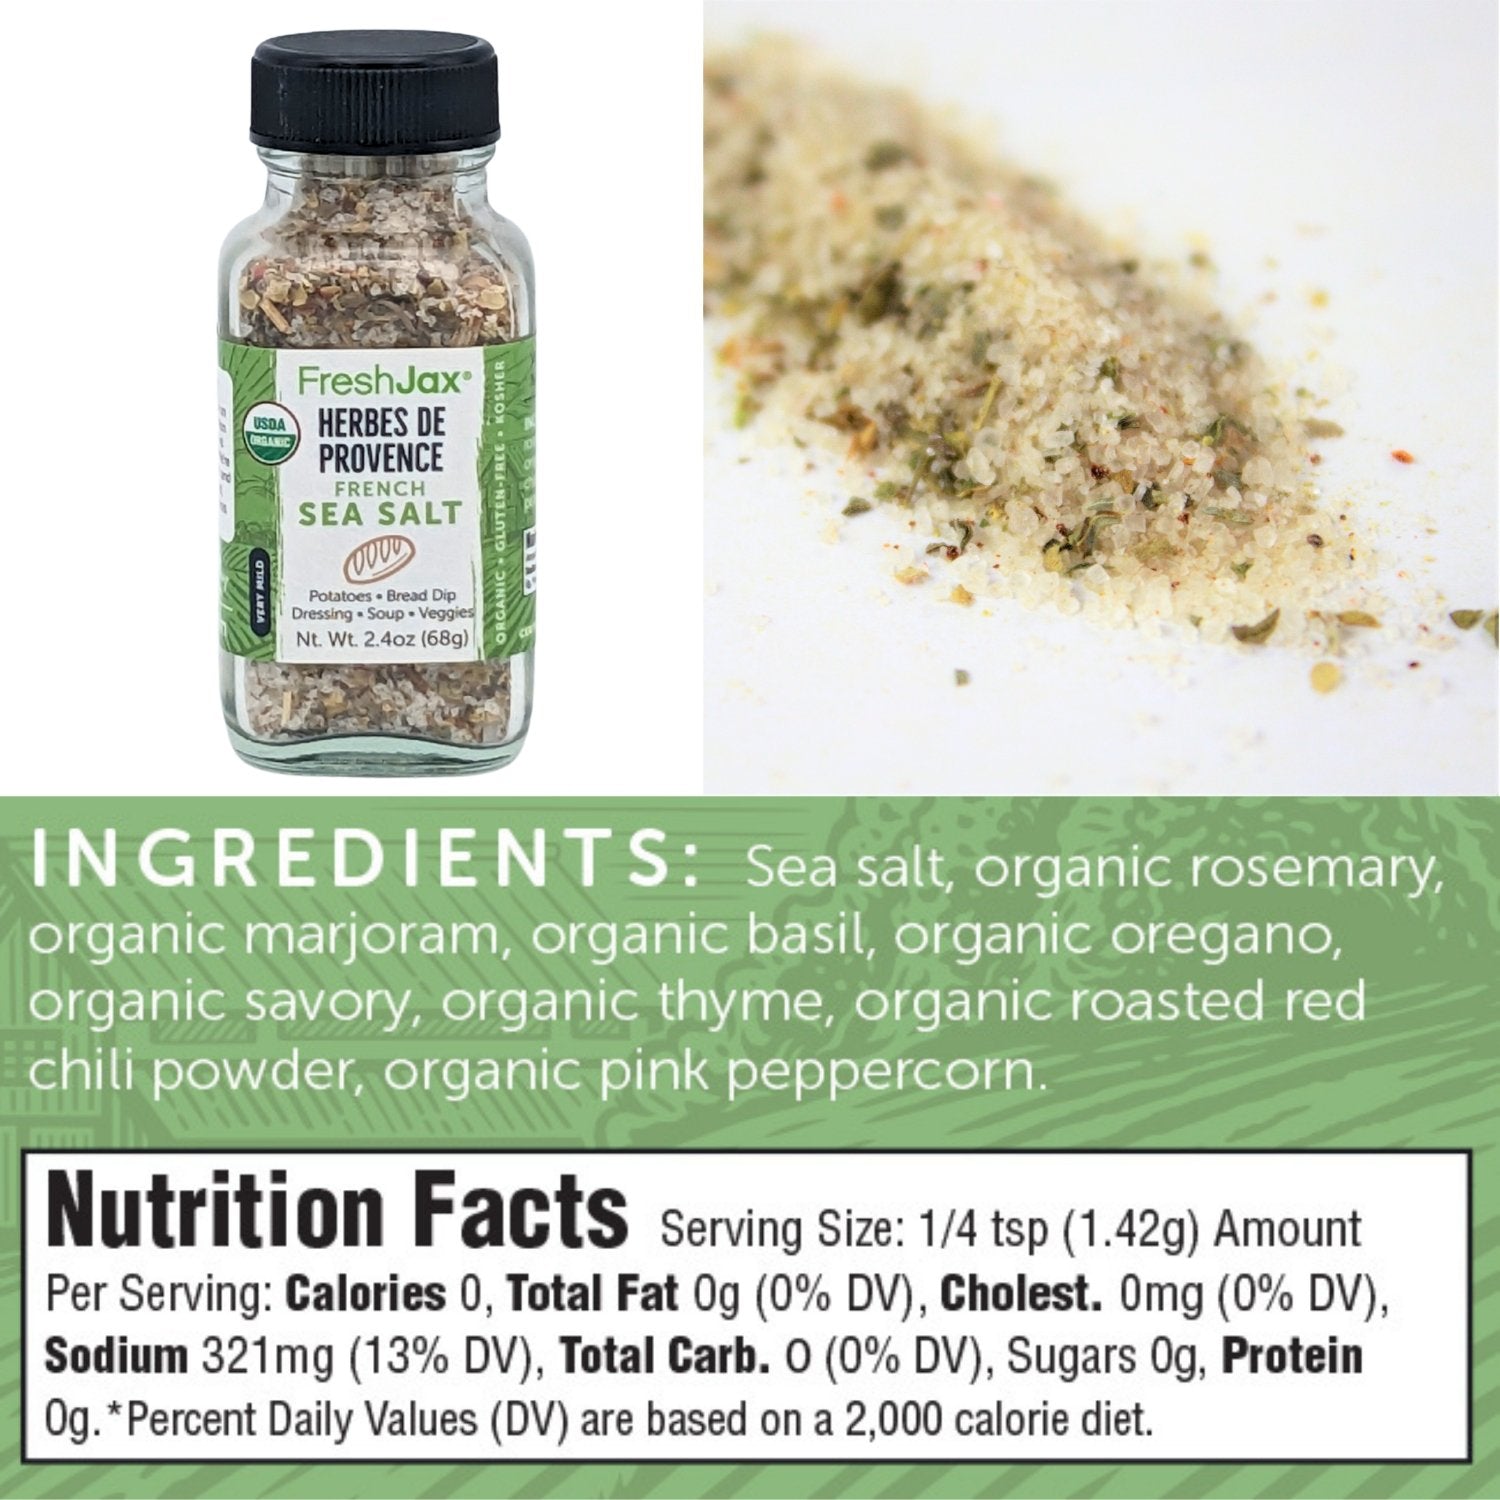 FreshJax Organic Spices Herbes de Provence French Sea Salt Ingredients and Nutritional Information